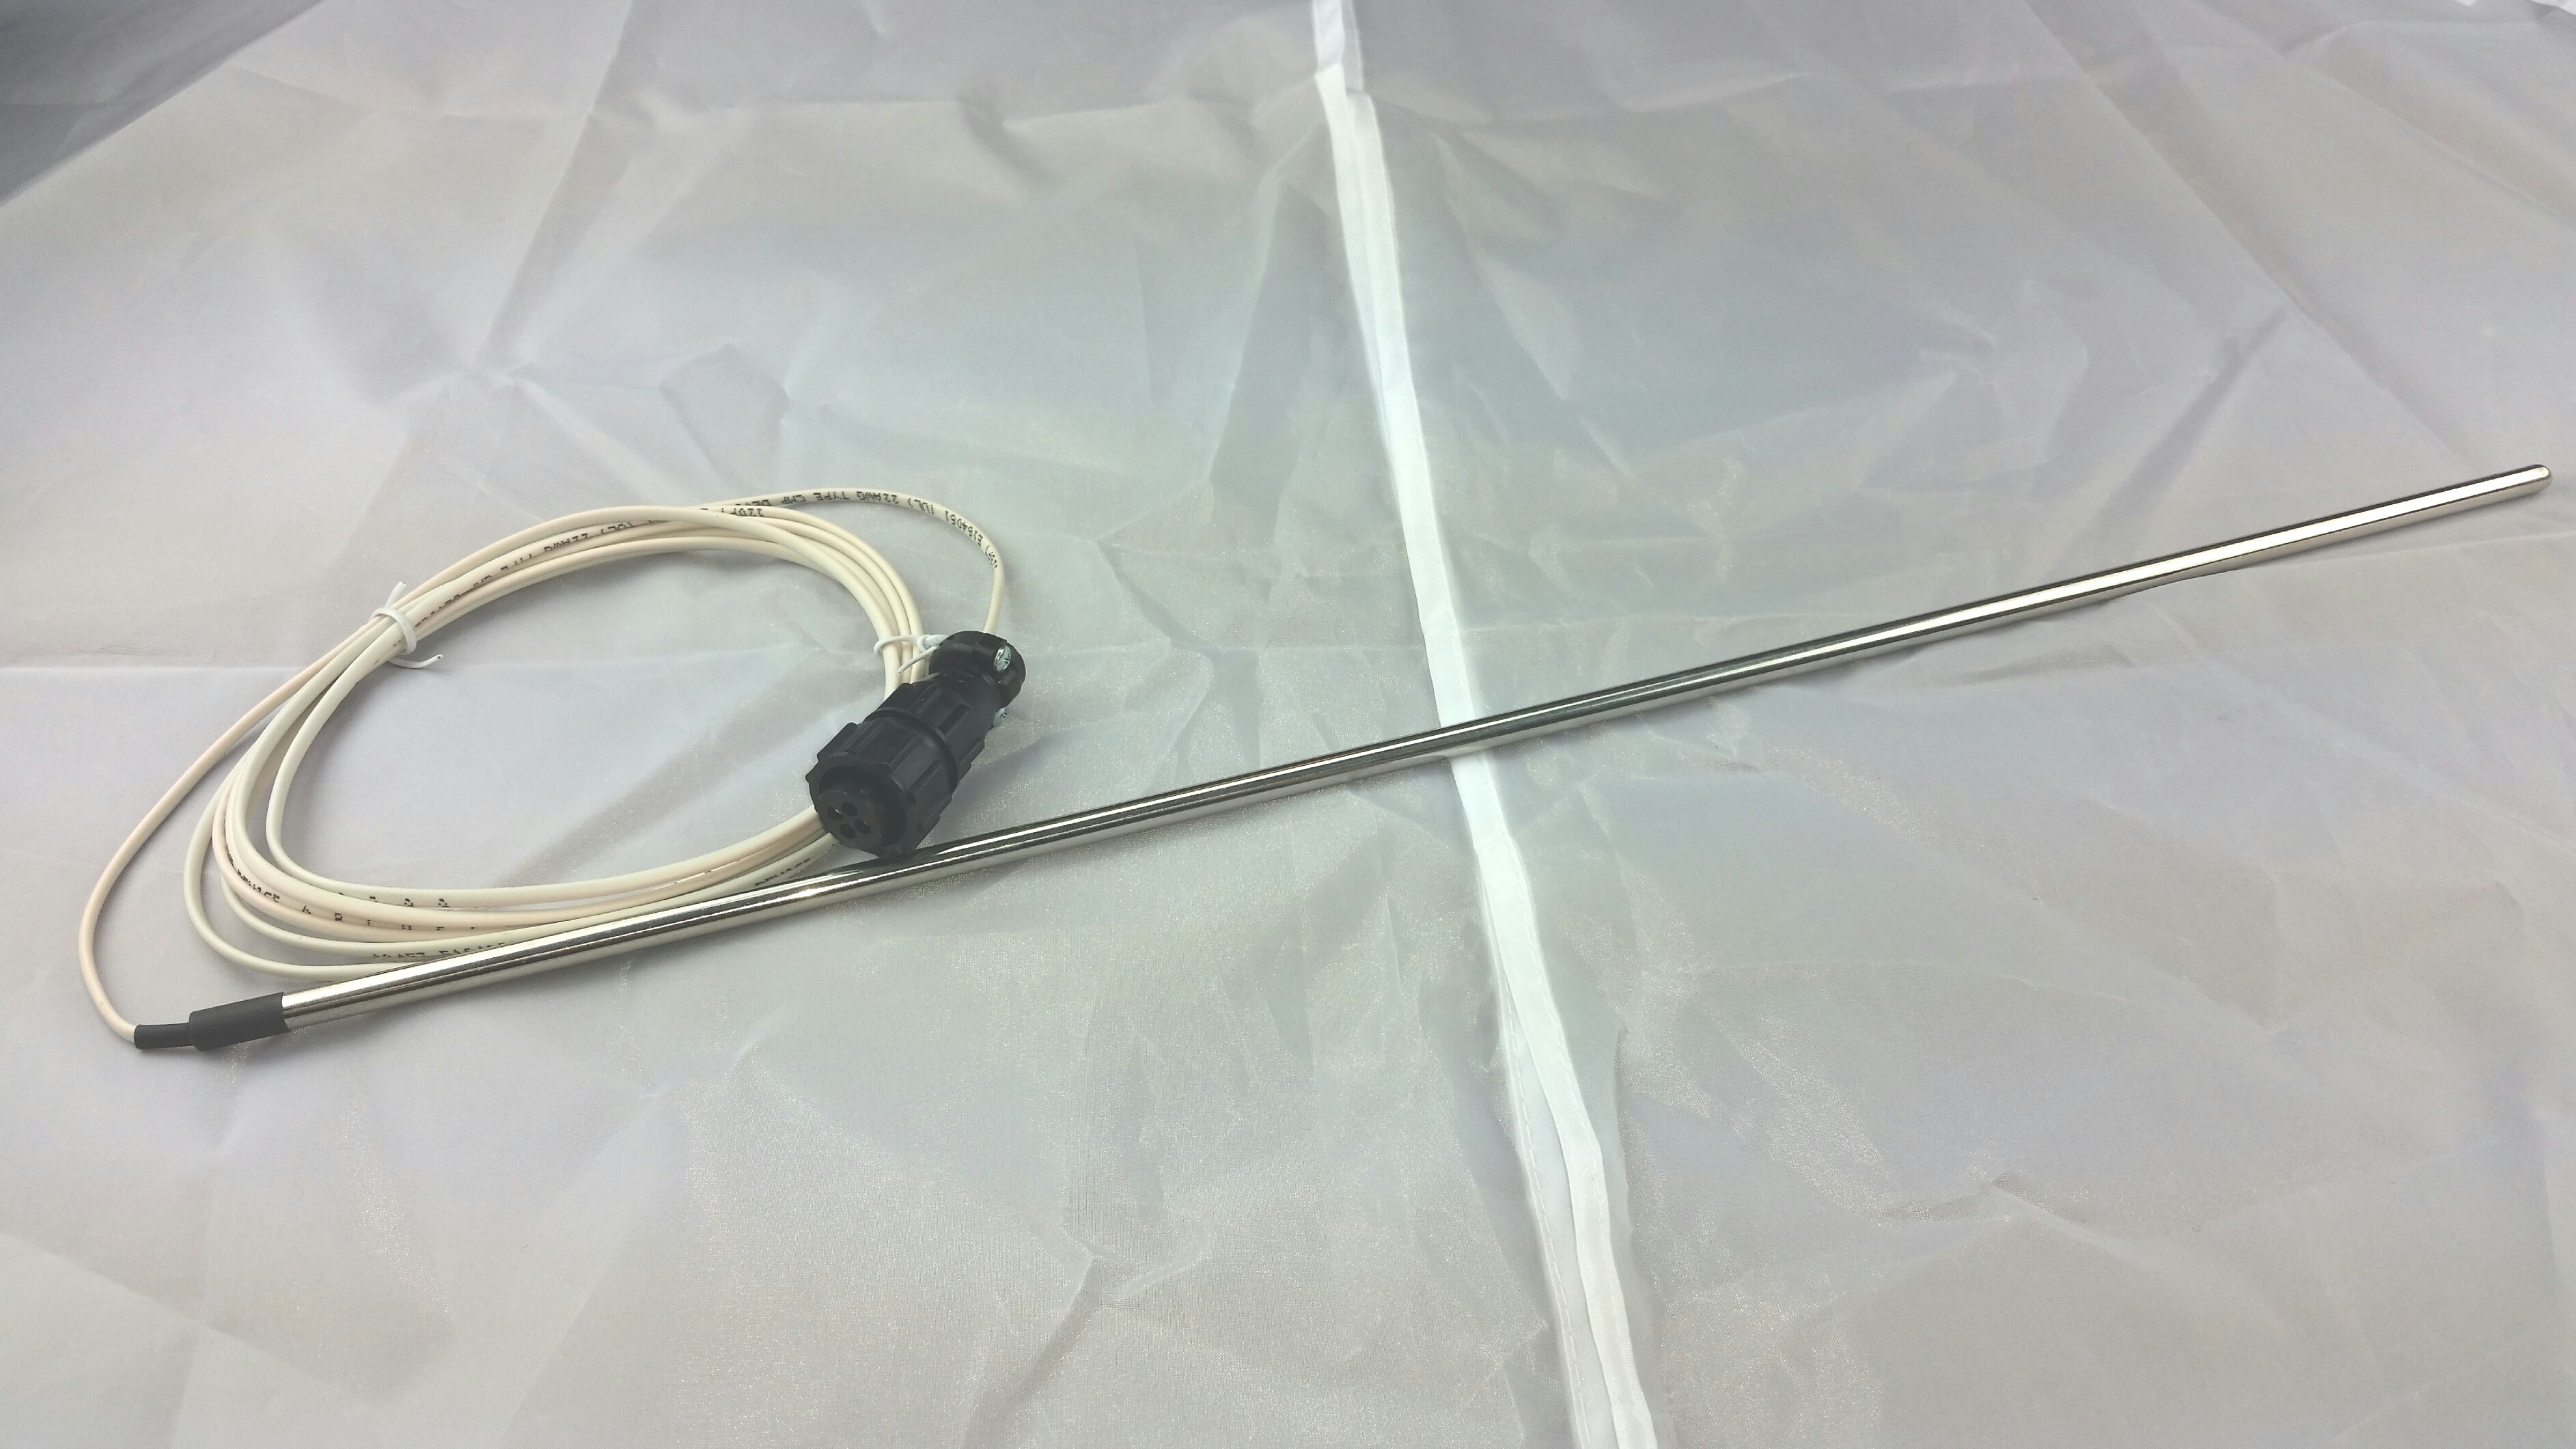 Stainless steel RTD temperature sensor for brewing